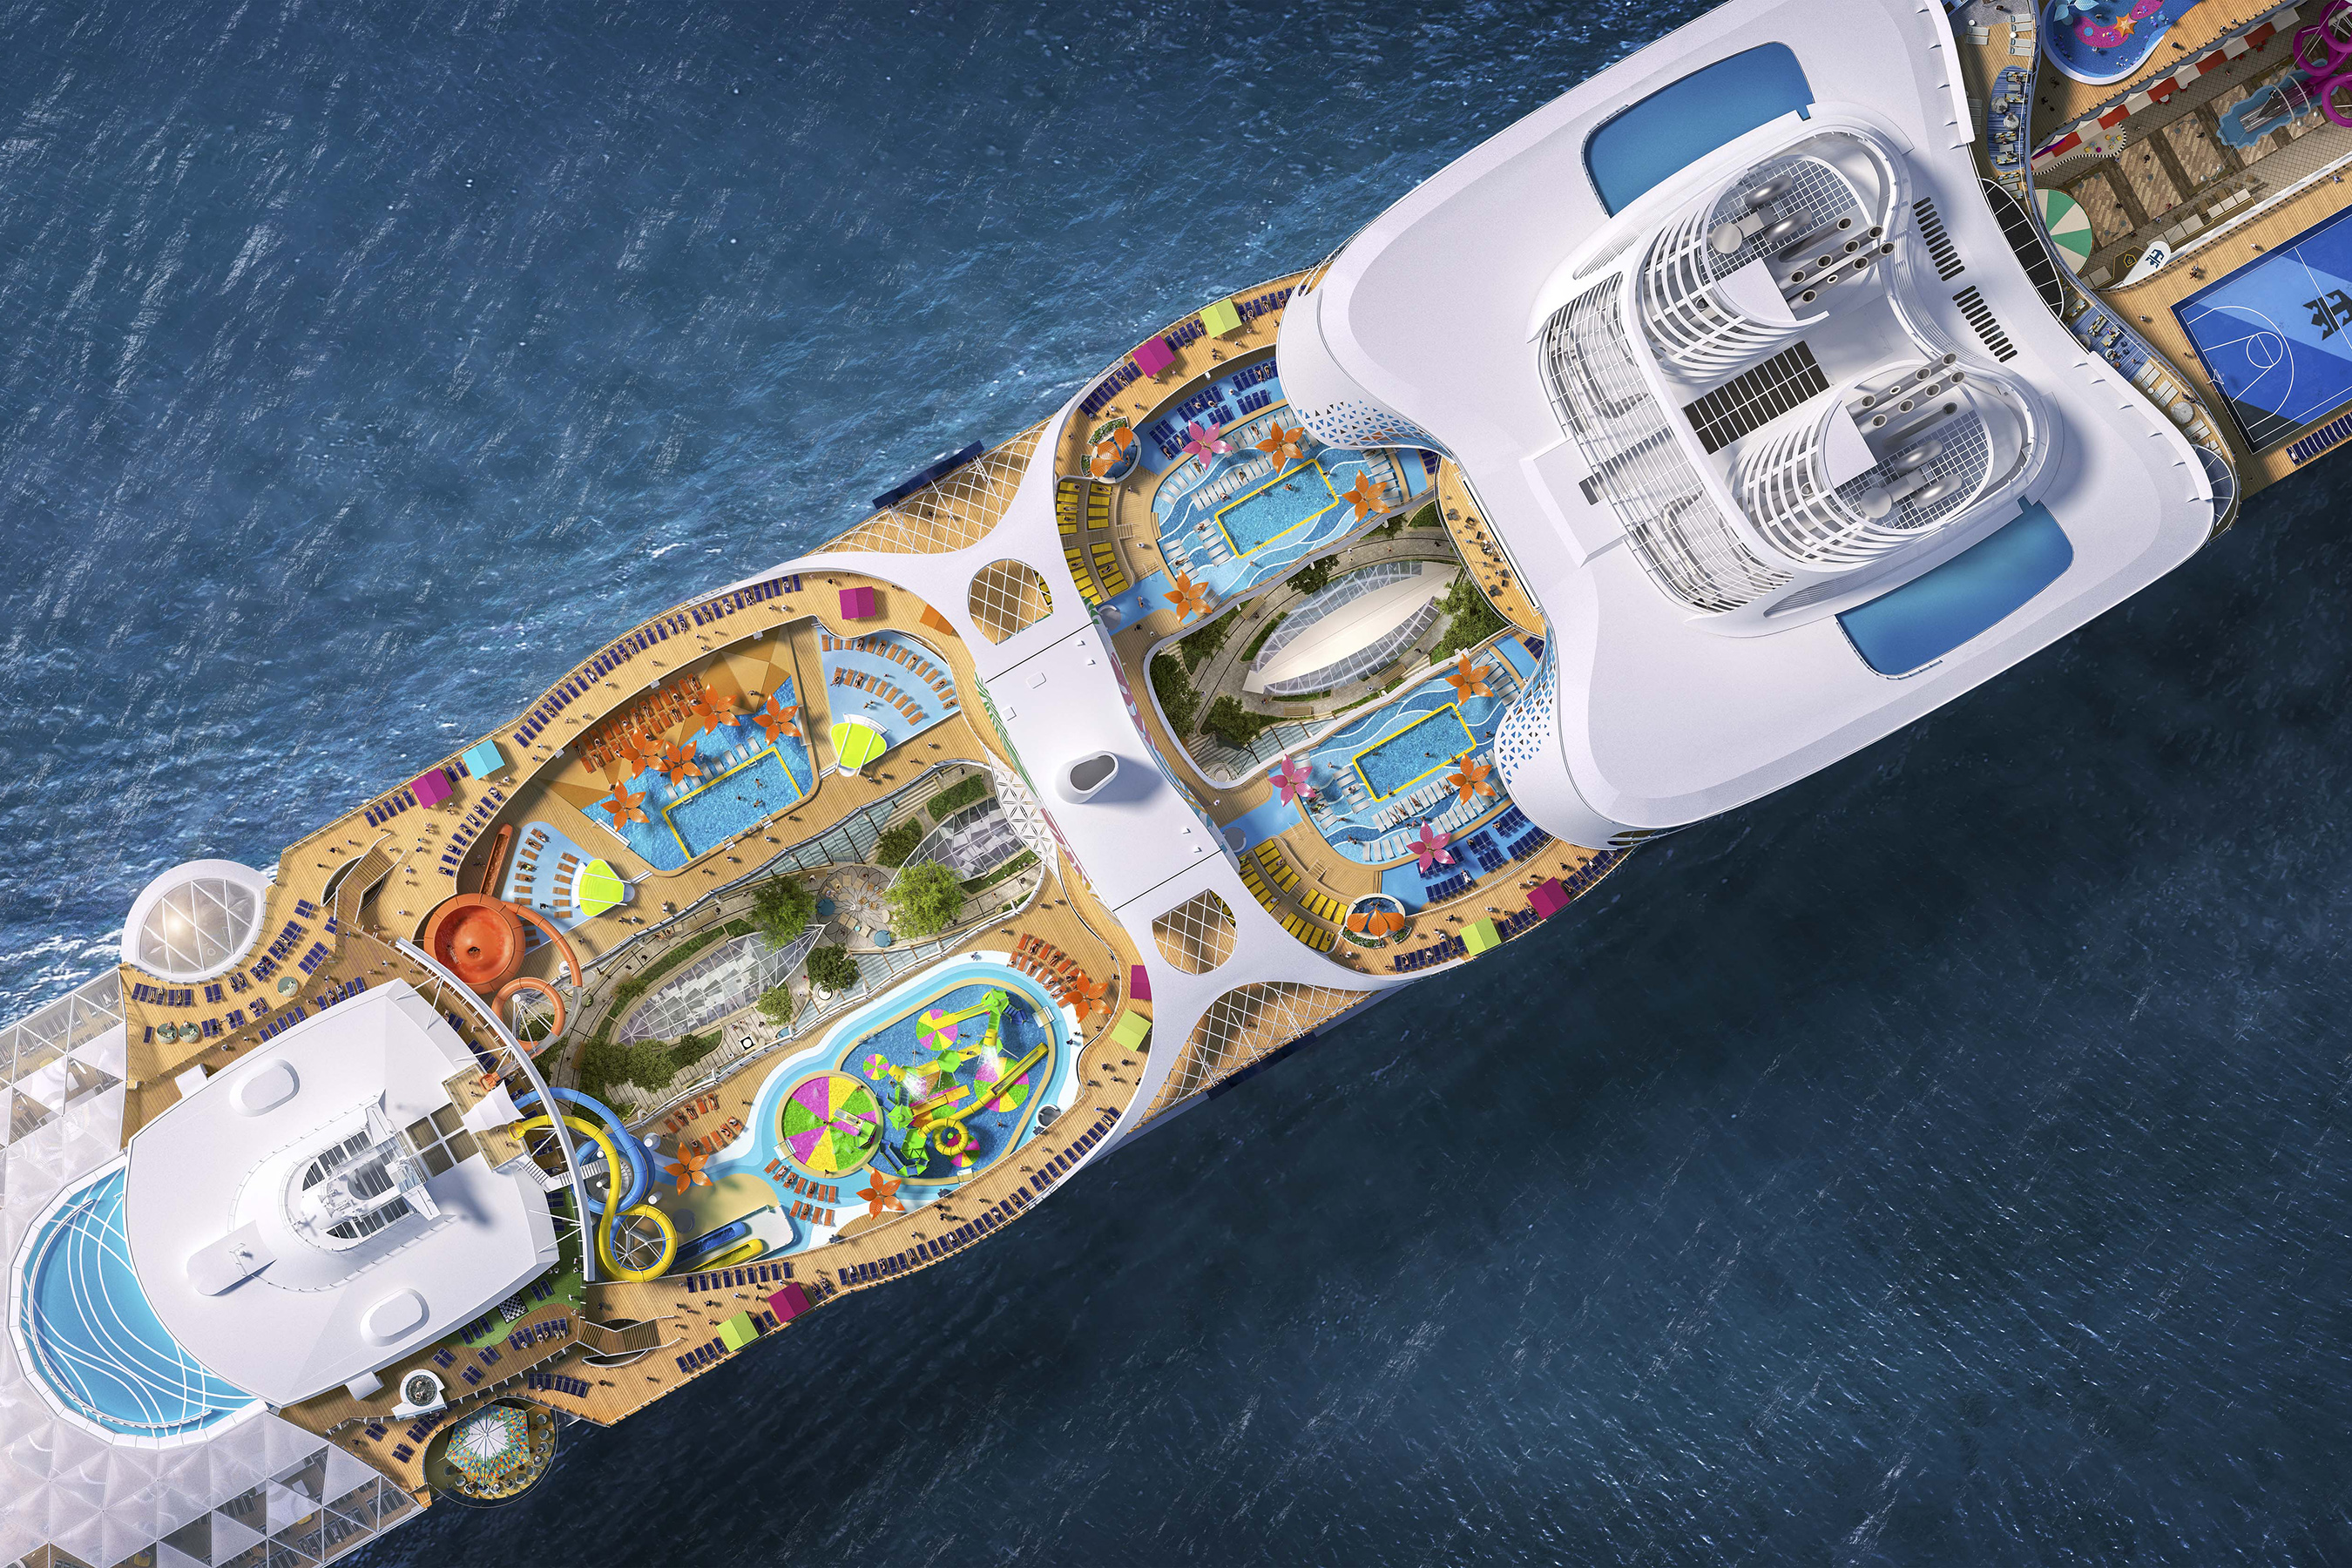 Vibes across the five pools on Royal Caribbean's new Utopia of the Seas range from upbeat to lowkey for everyone.